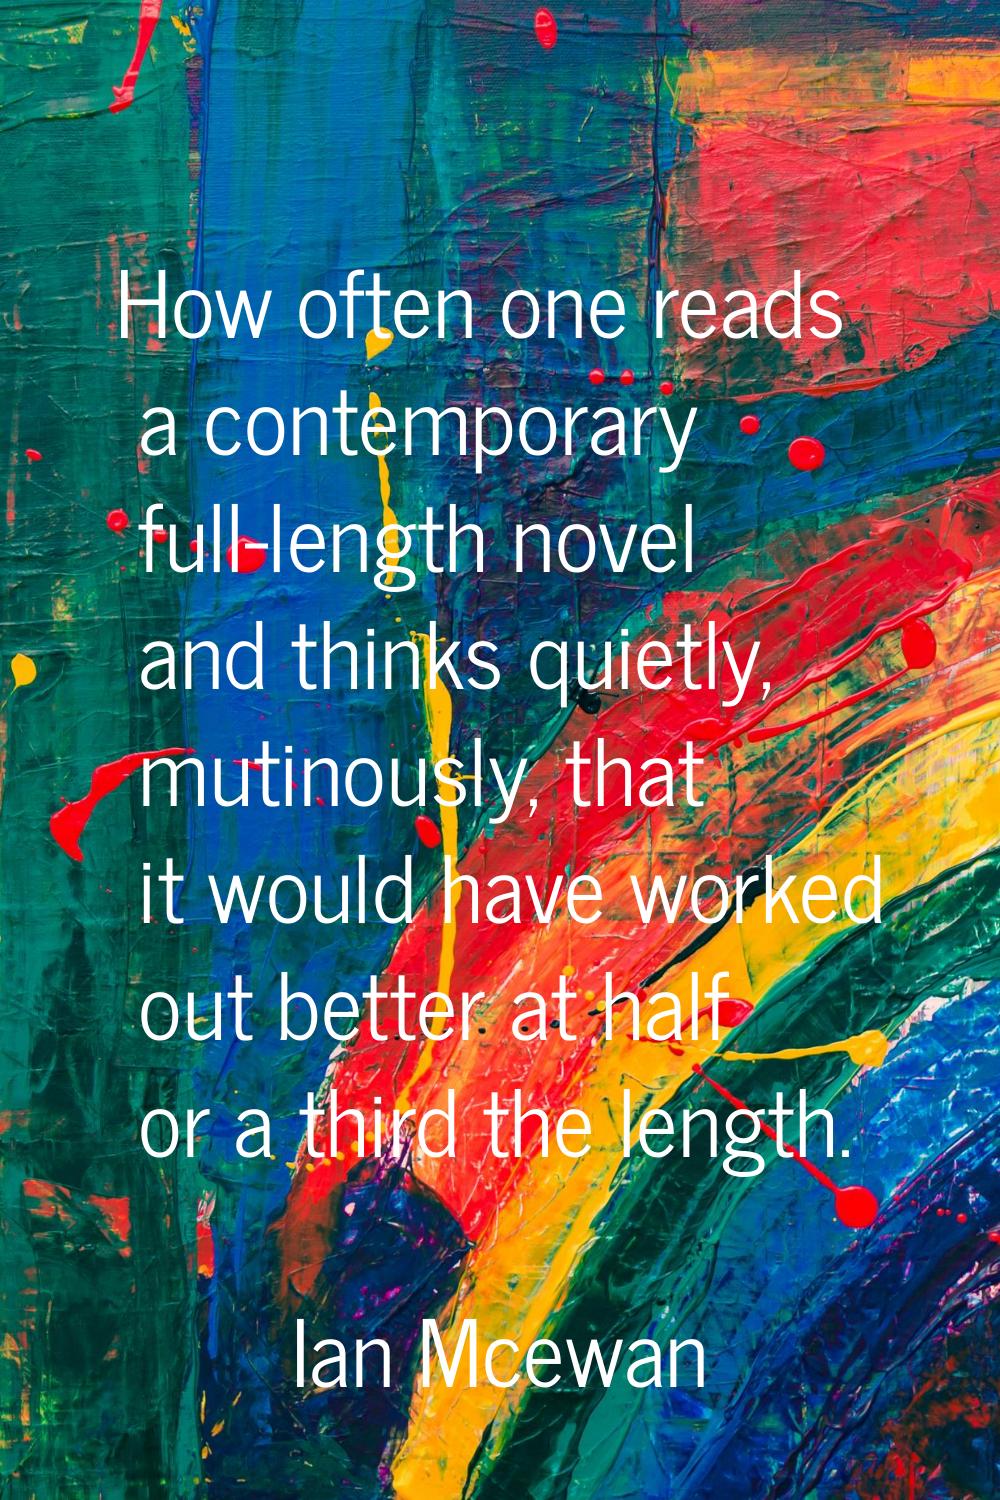 How often one reads a contemporary full-length novel and thinks quietly, mutinously, that it would 